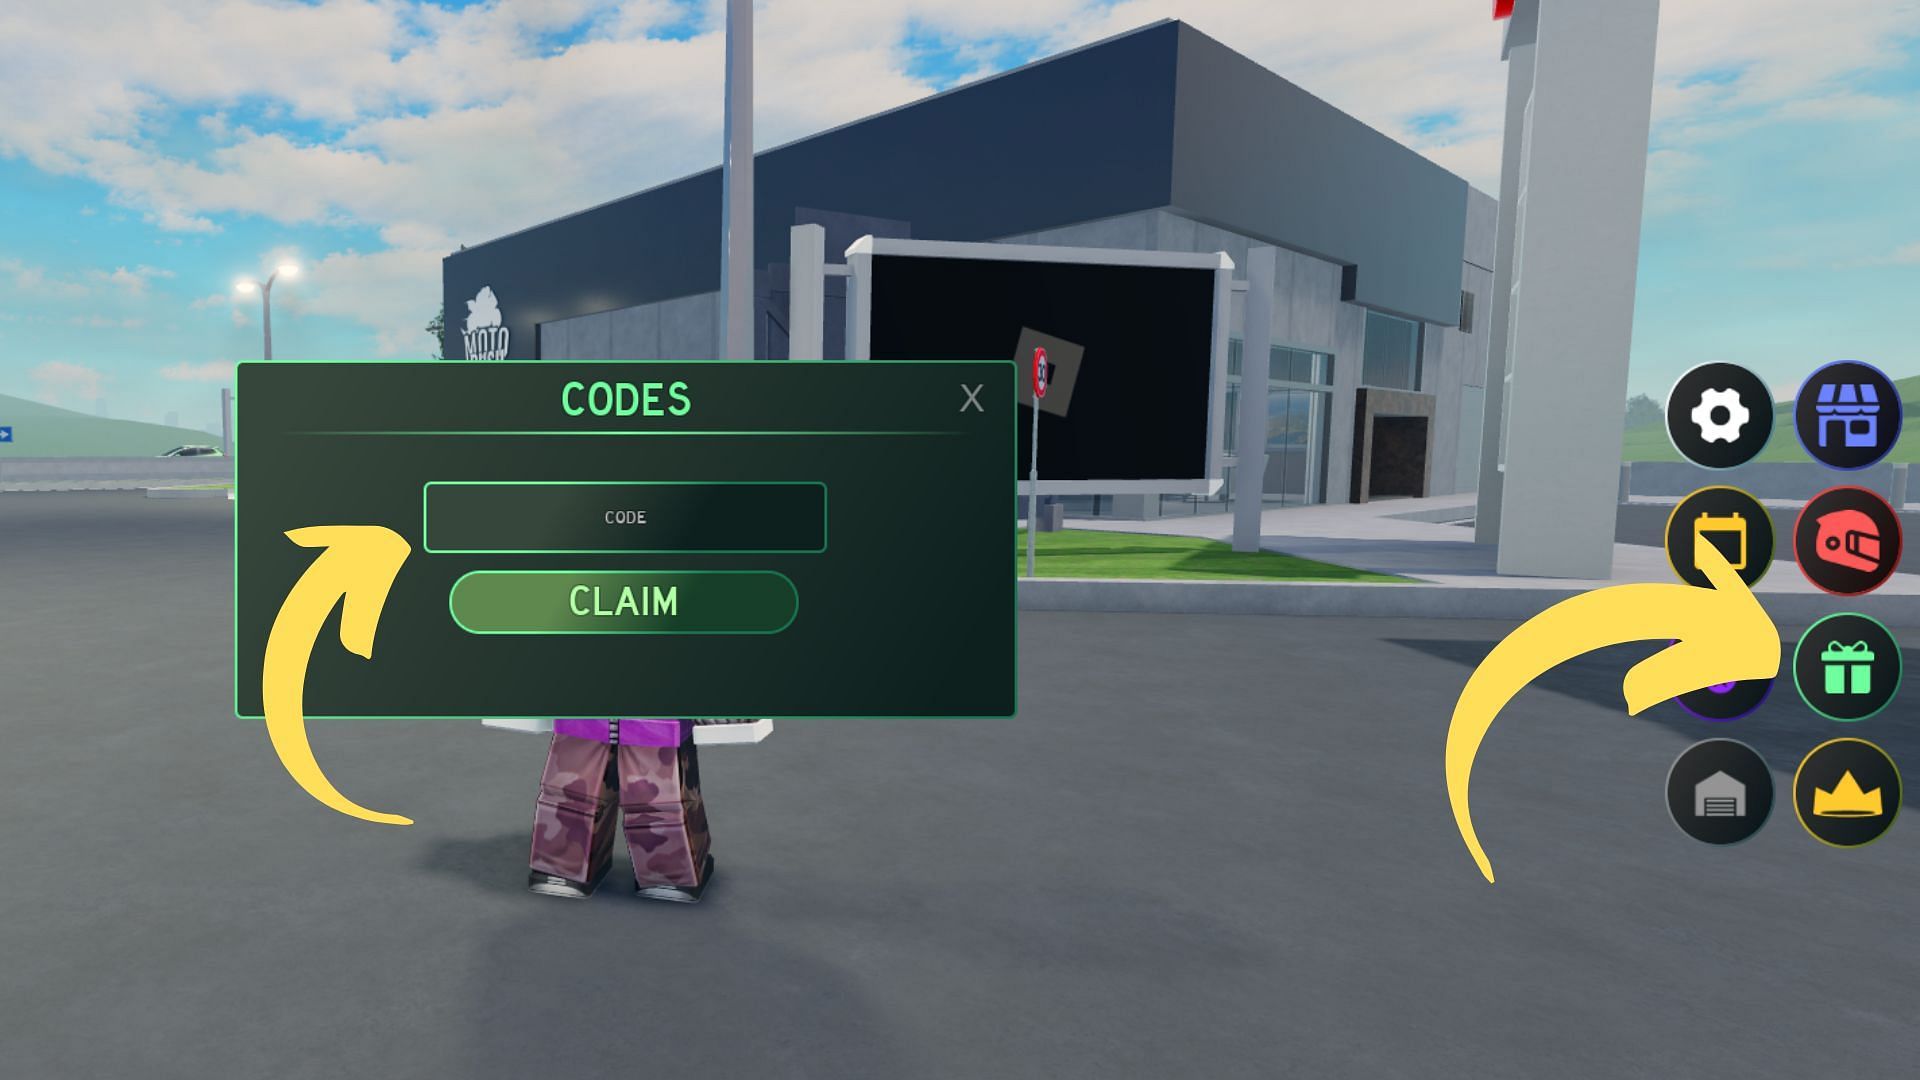 Does Retail Tycoon 2 have any codes? (Image via Roblox)